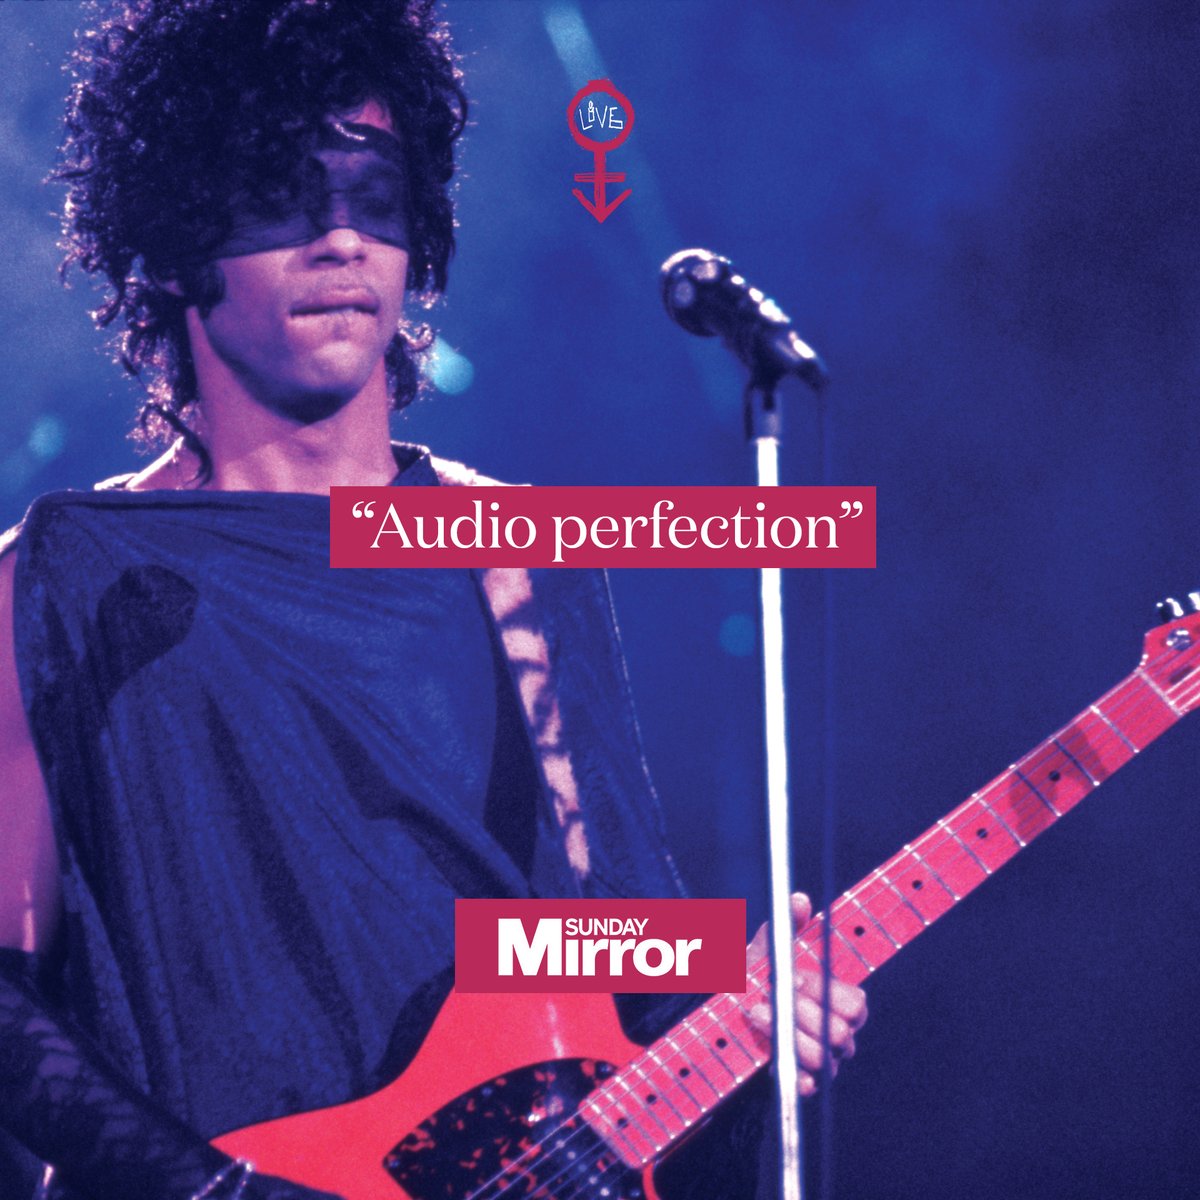 The quality of the completely remixed, enhanced release of Prince and @TheRevolution: Live has been celebrated by @AmerSongwriter, the @RecordingAcad, @Variety, and the Sunday @DailyMirror, who hailed it as 'audio perfection.'